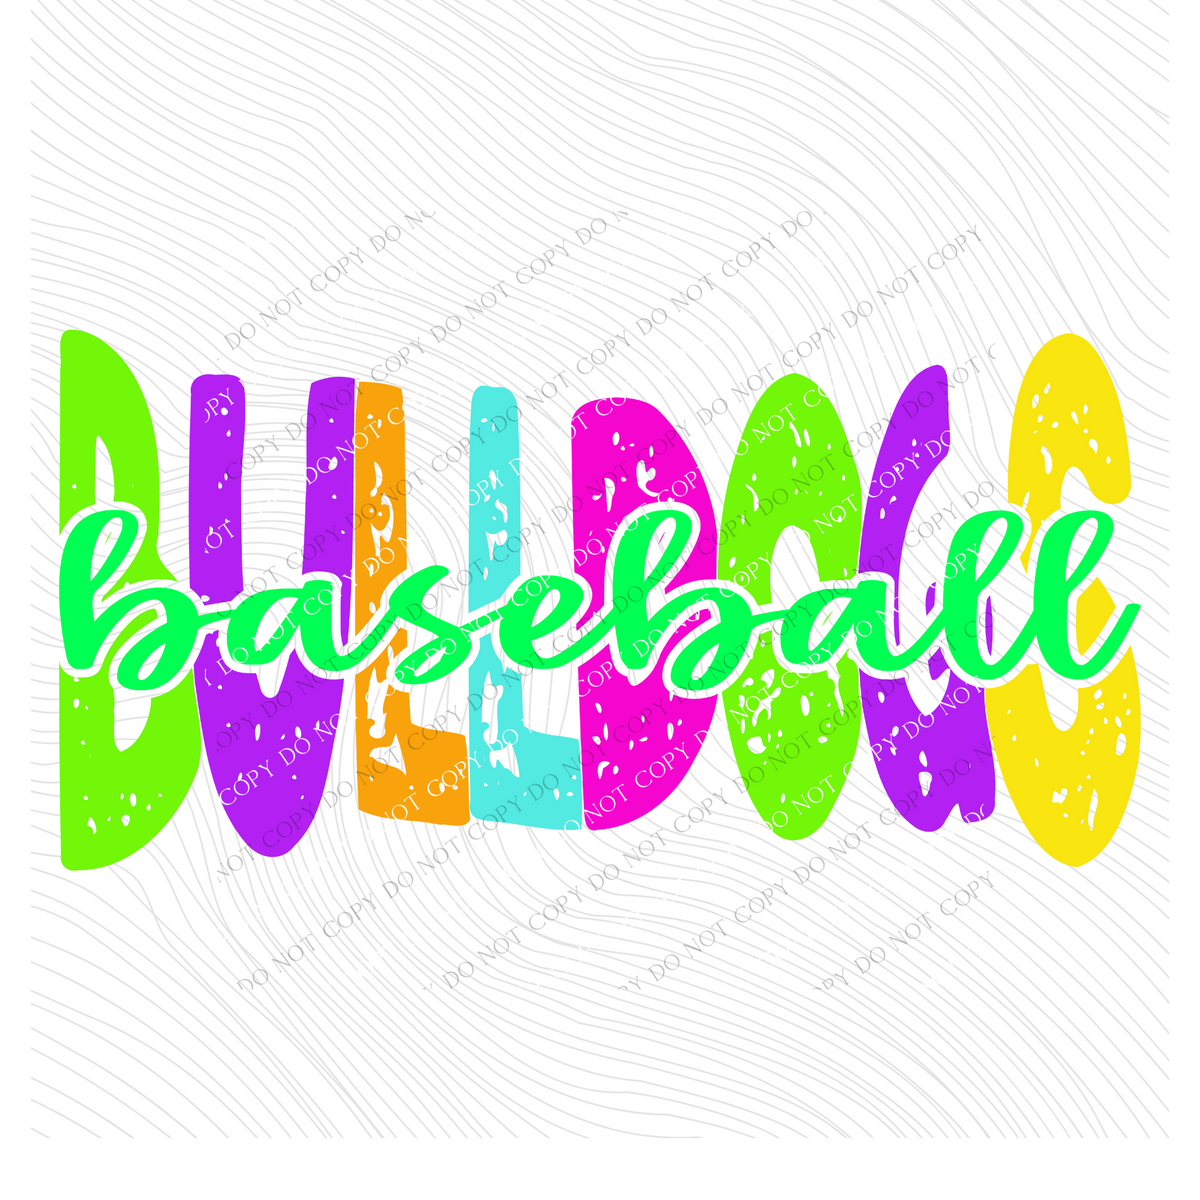 Bulldogs Distressed Blank, Cutout Softball, Baseball & Volleyball in Neons all Included Digital Design, PNG